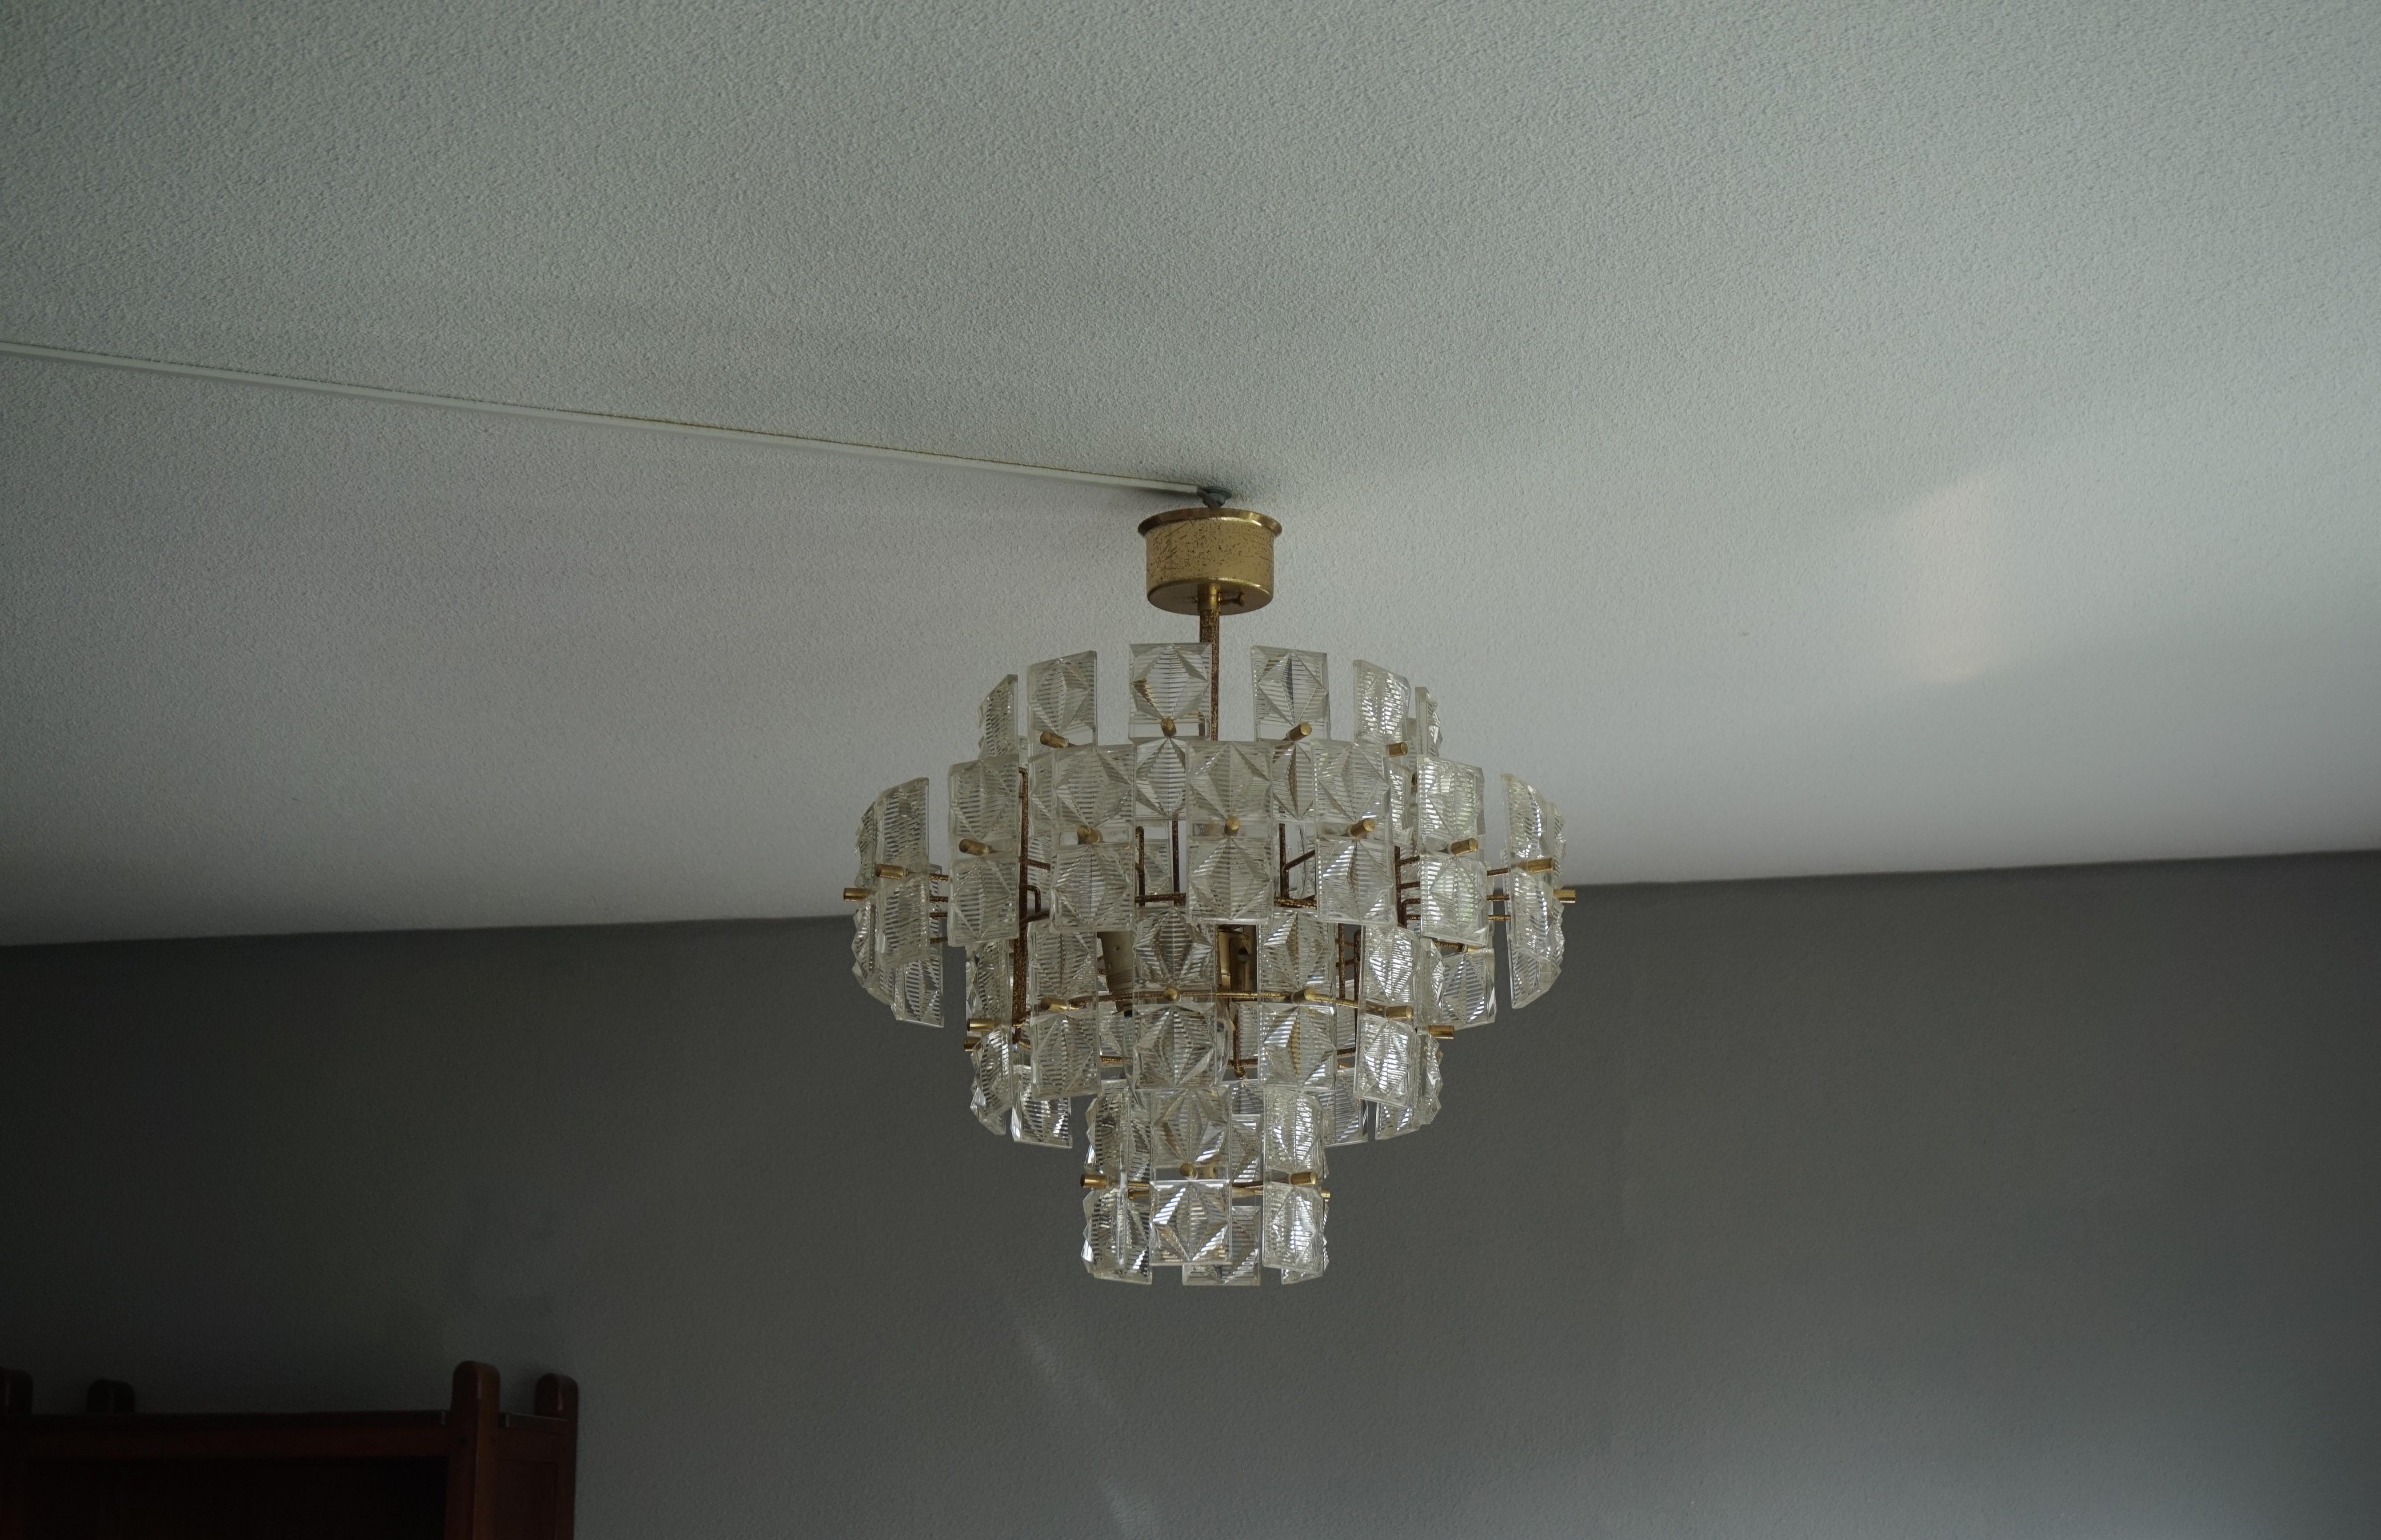 Stylish and wonderful light creating midcentury chandelier.

It is very hard to explain why certain light fixtures appeal more to a larger group of people than others. To us, there is something about the shape, the colors and the mix of materials